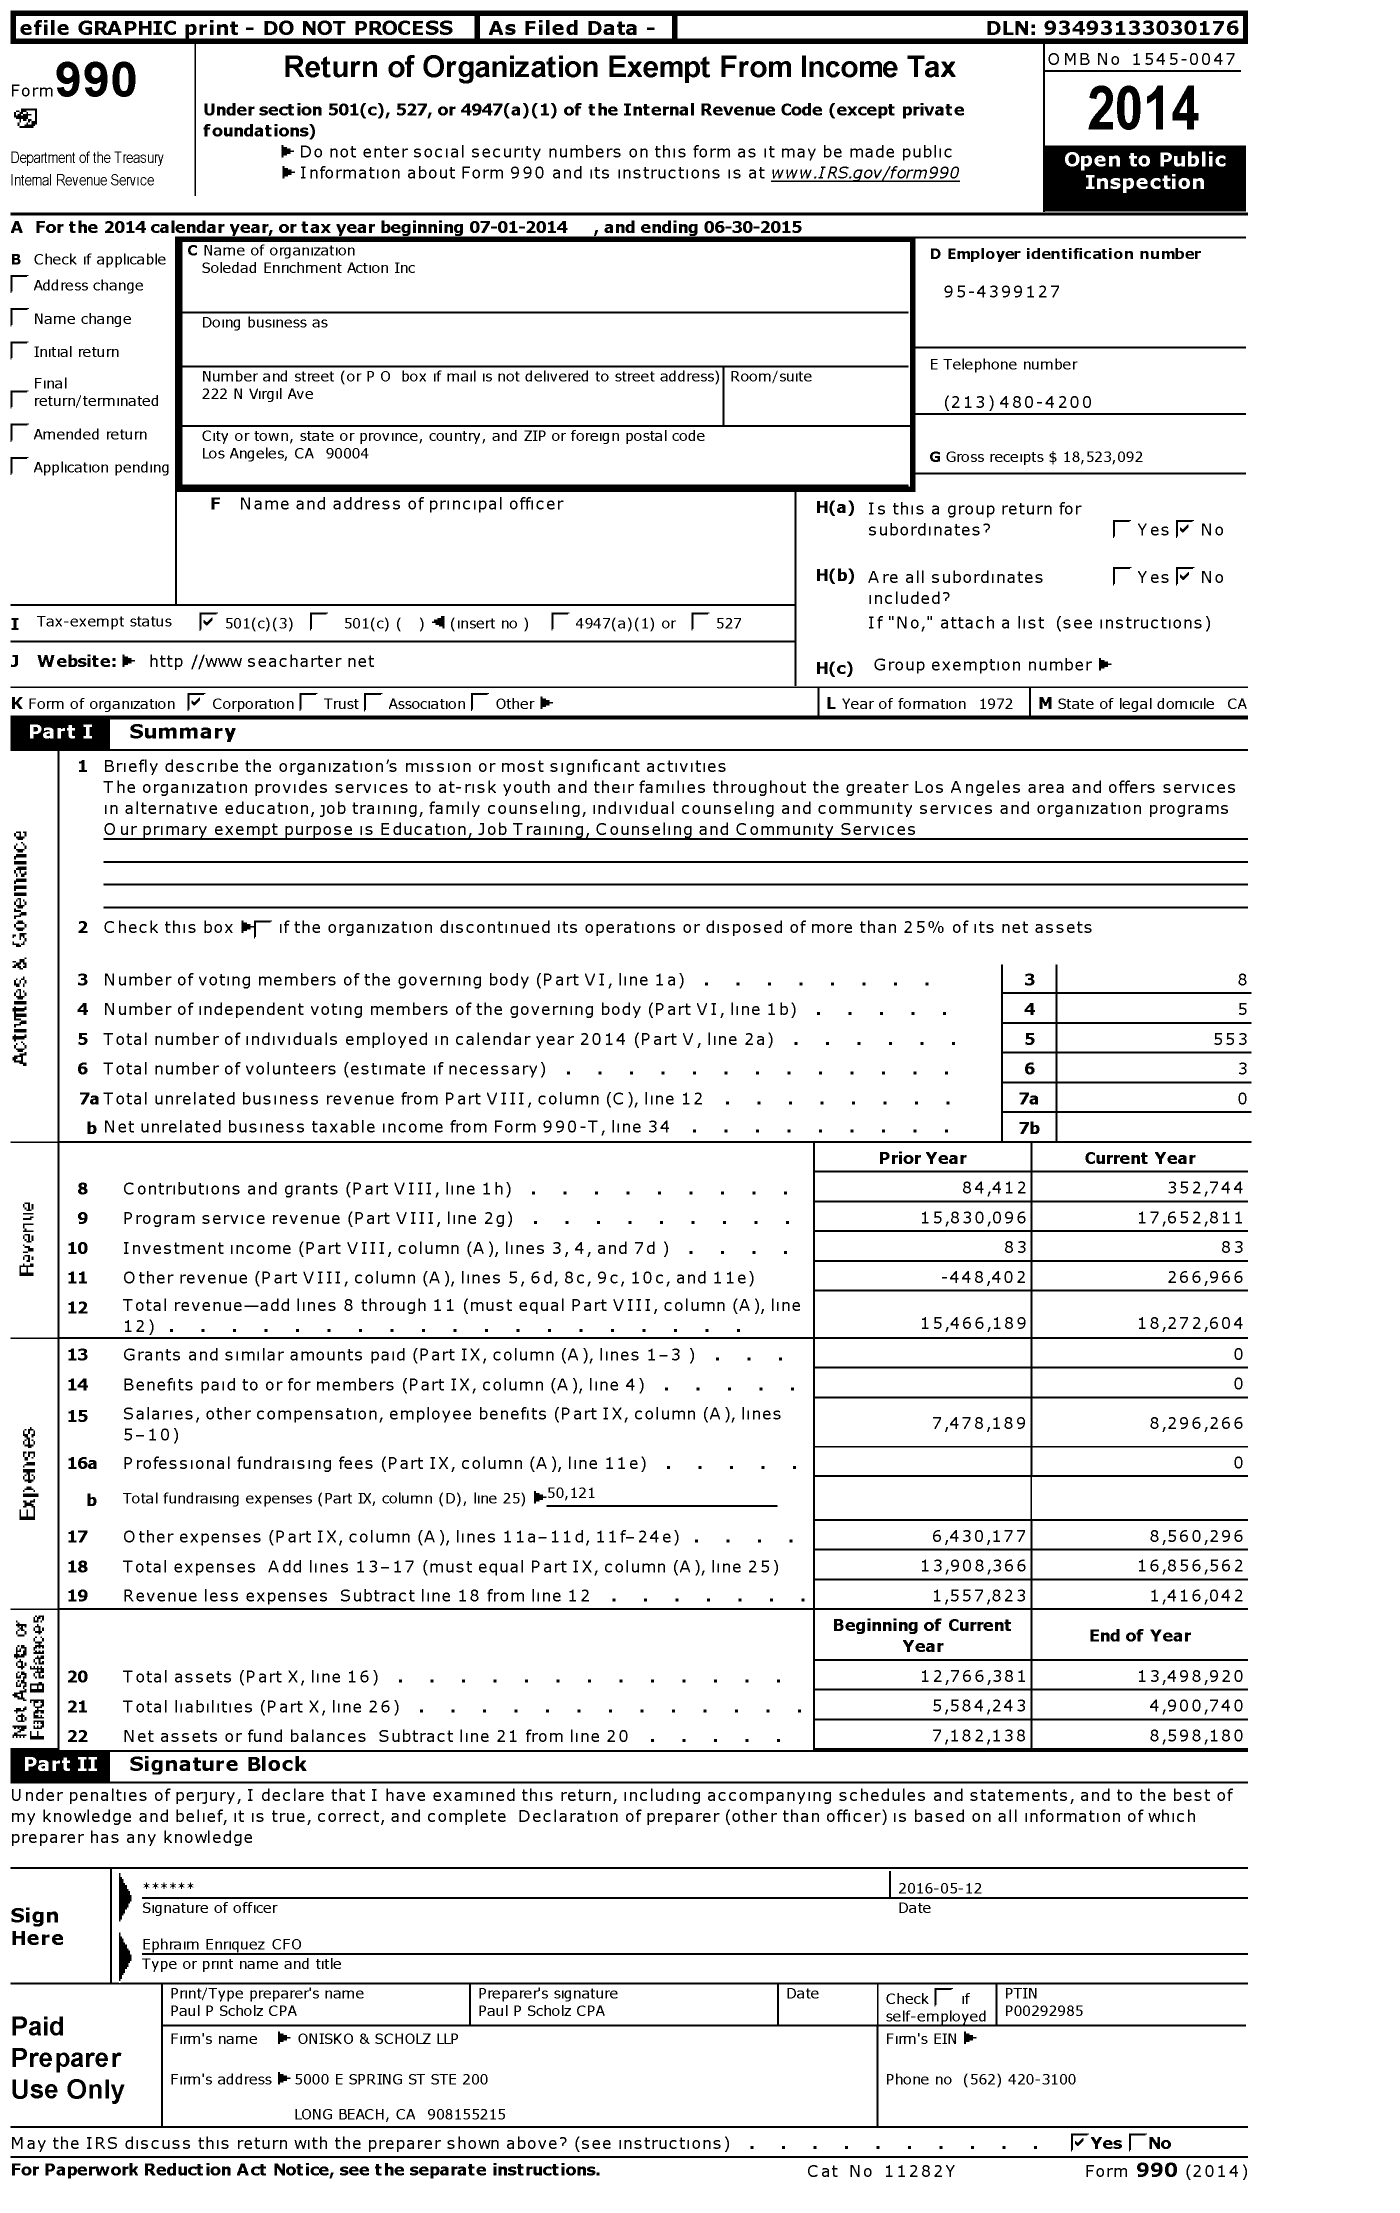 Image of first page of 2014 Form 990 for Soledad Enrichment Action (SEA)